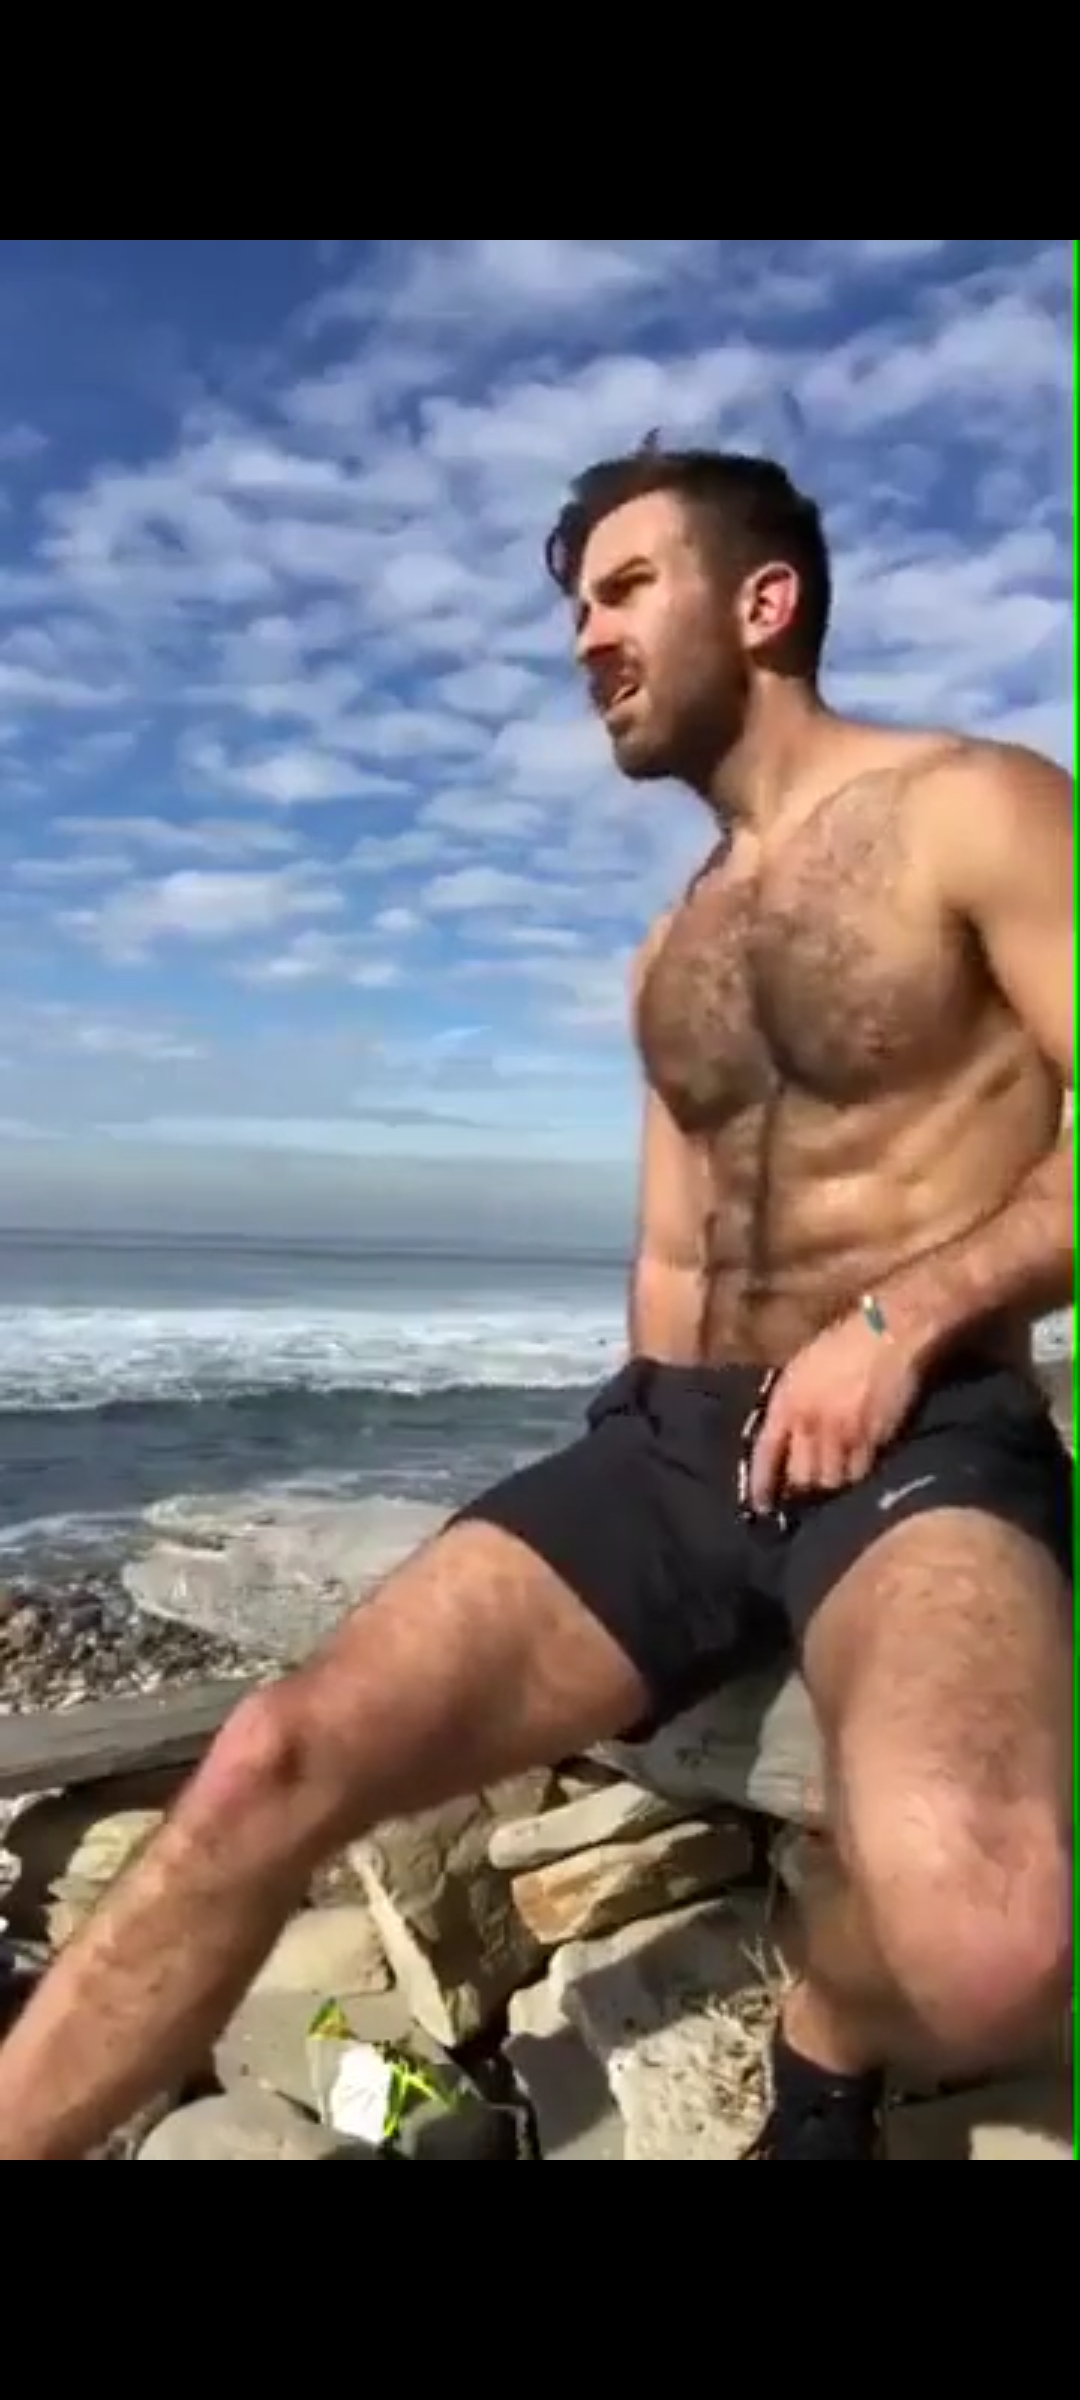 Hot guy jerk off by the sea